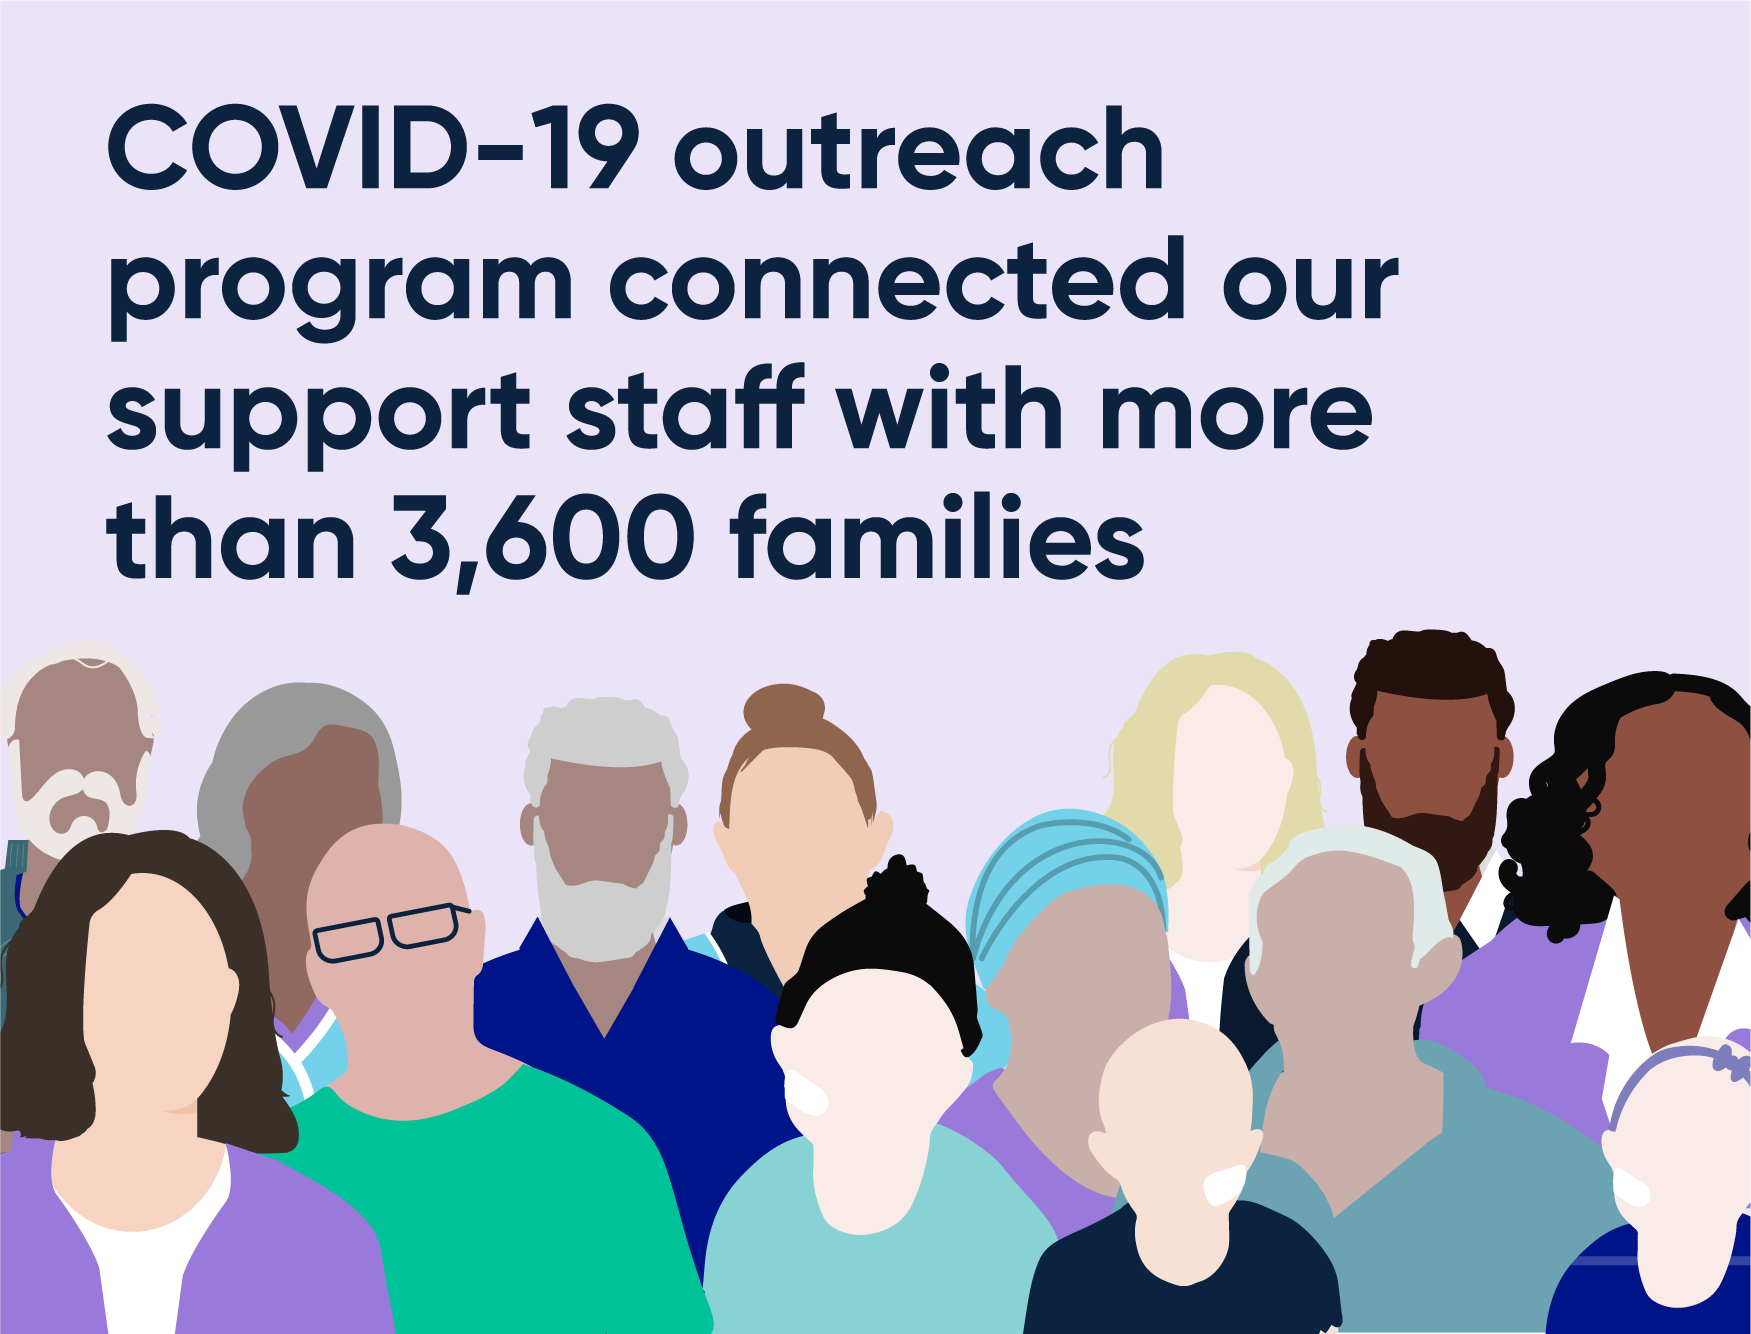 COVID-19 outreach program connected our Leukaemia Foundation support staff with more than 3,600 families